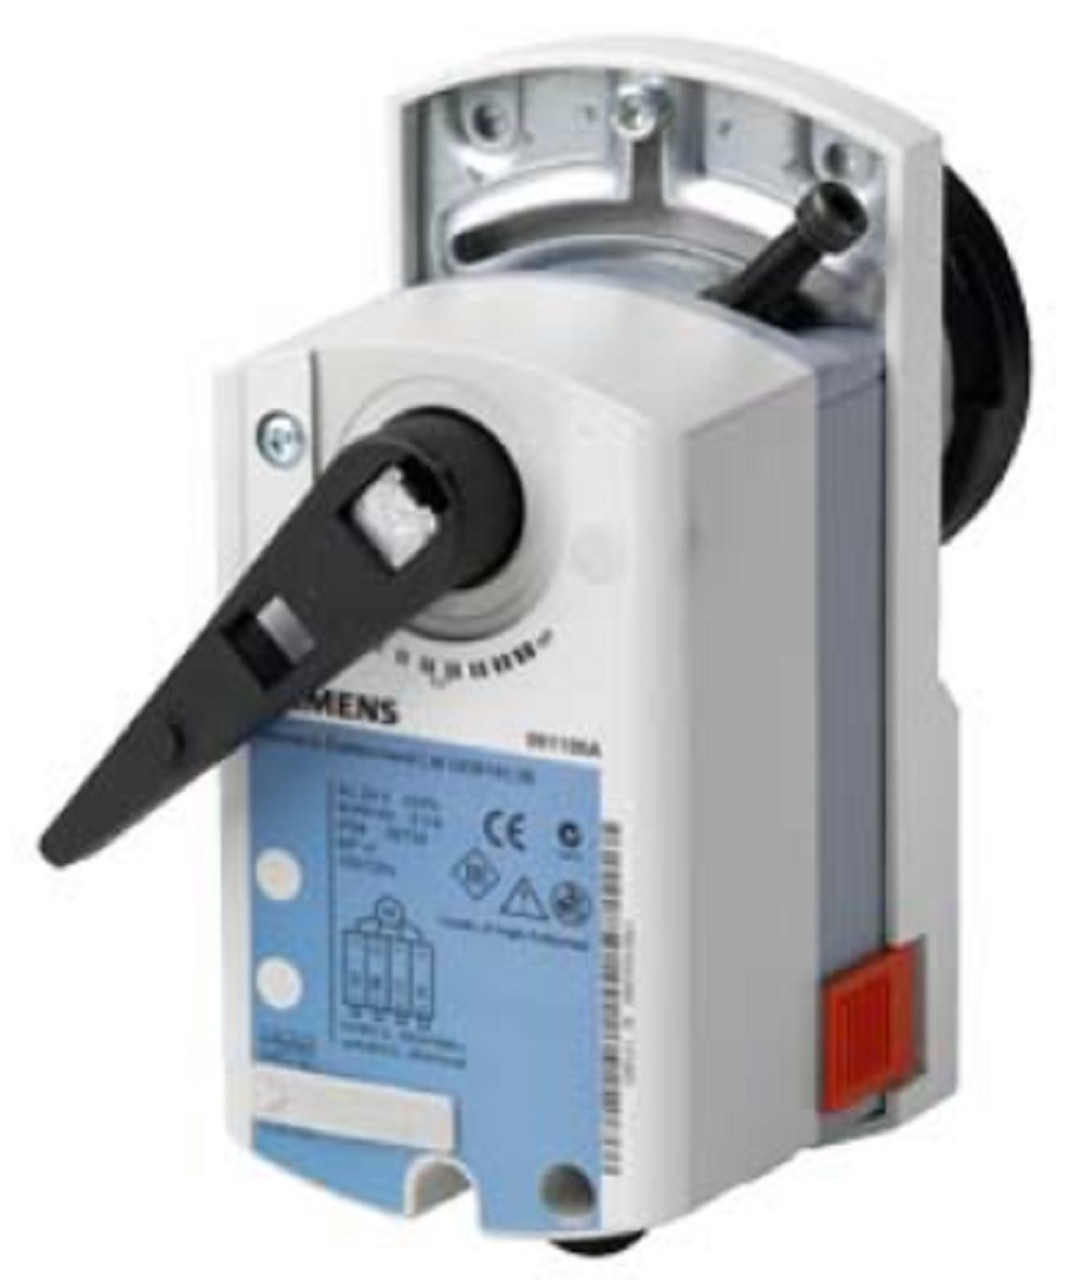 Siemens GDB131.9E Electromotoric Rotary Actuator, AC 24 V, 3-Position, 5Nm, 150s [New]